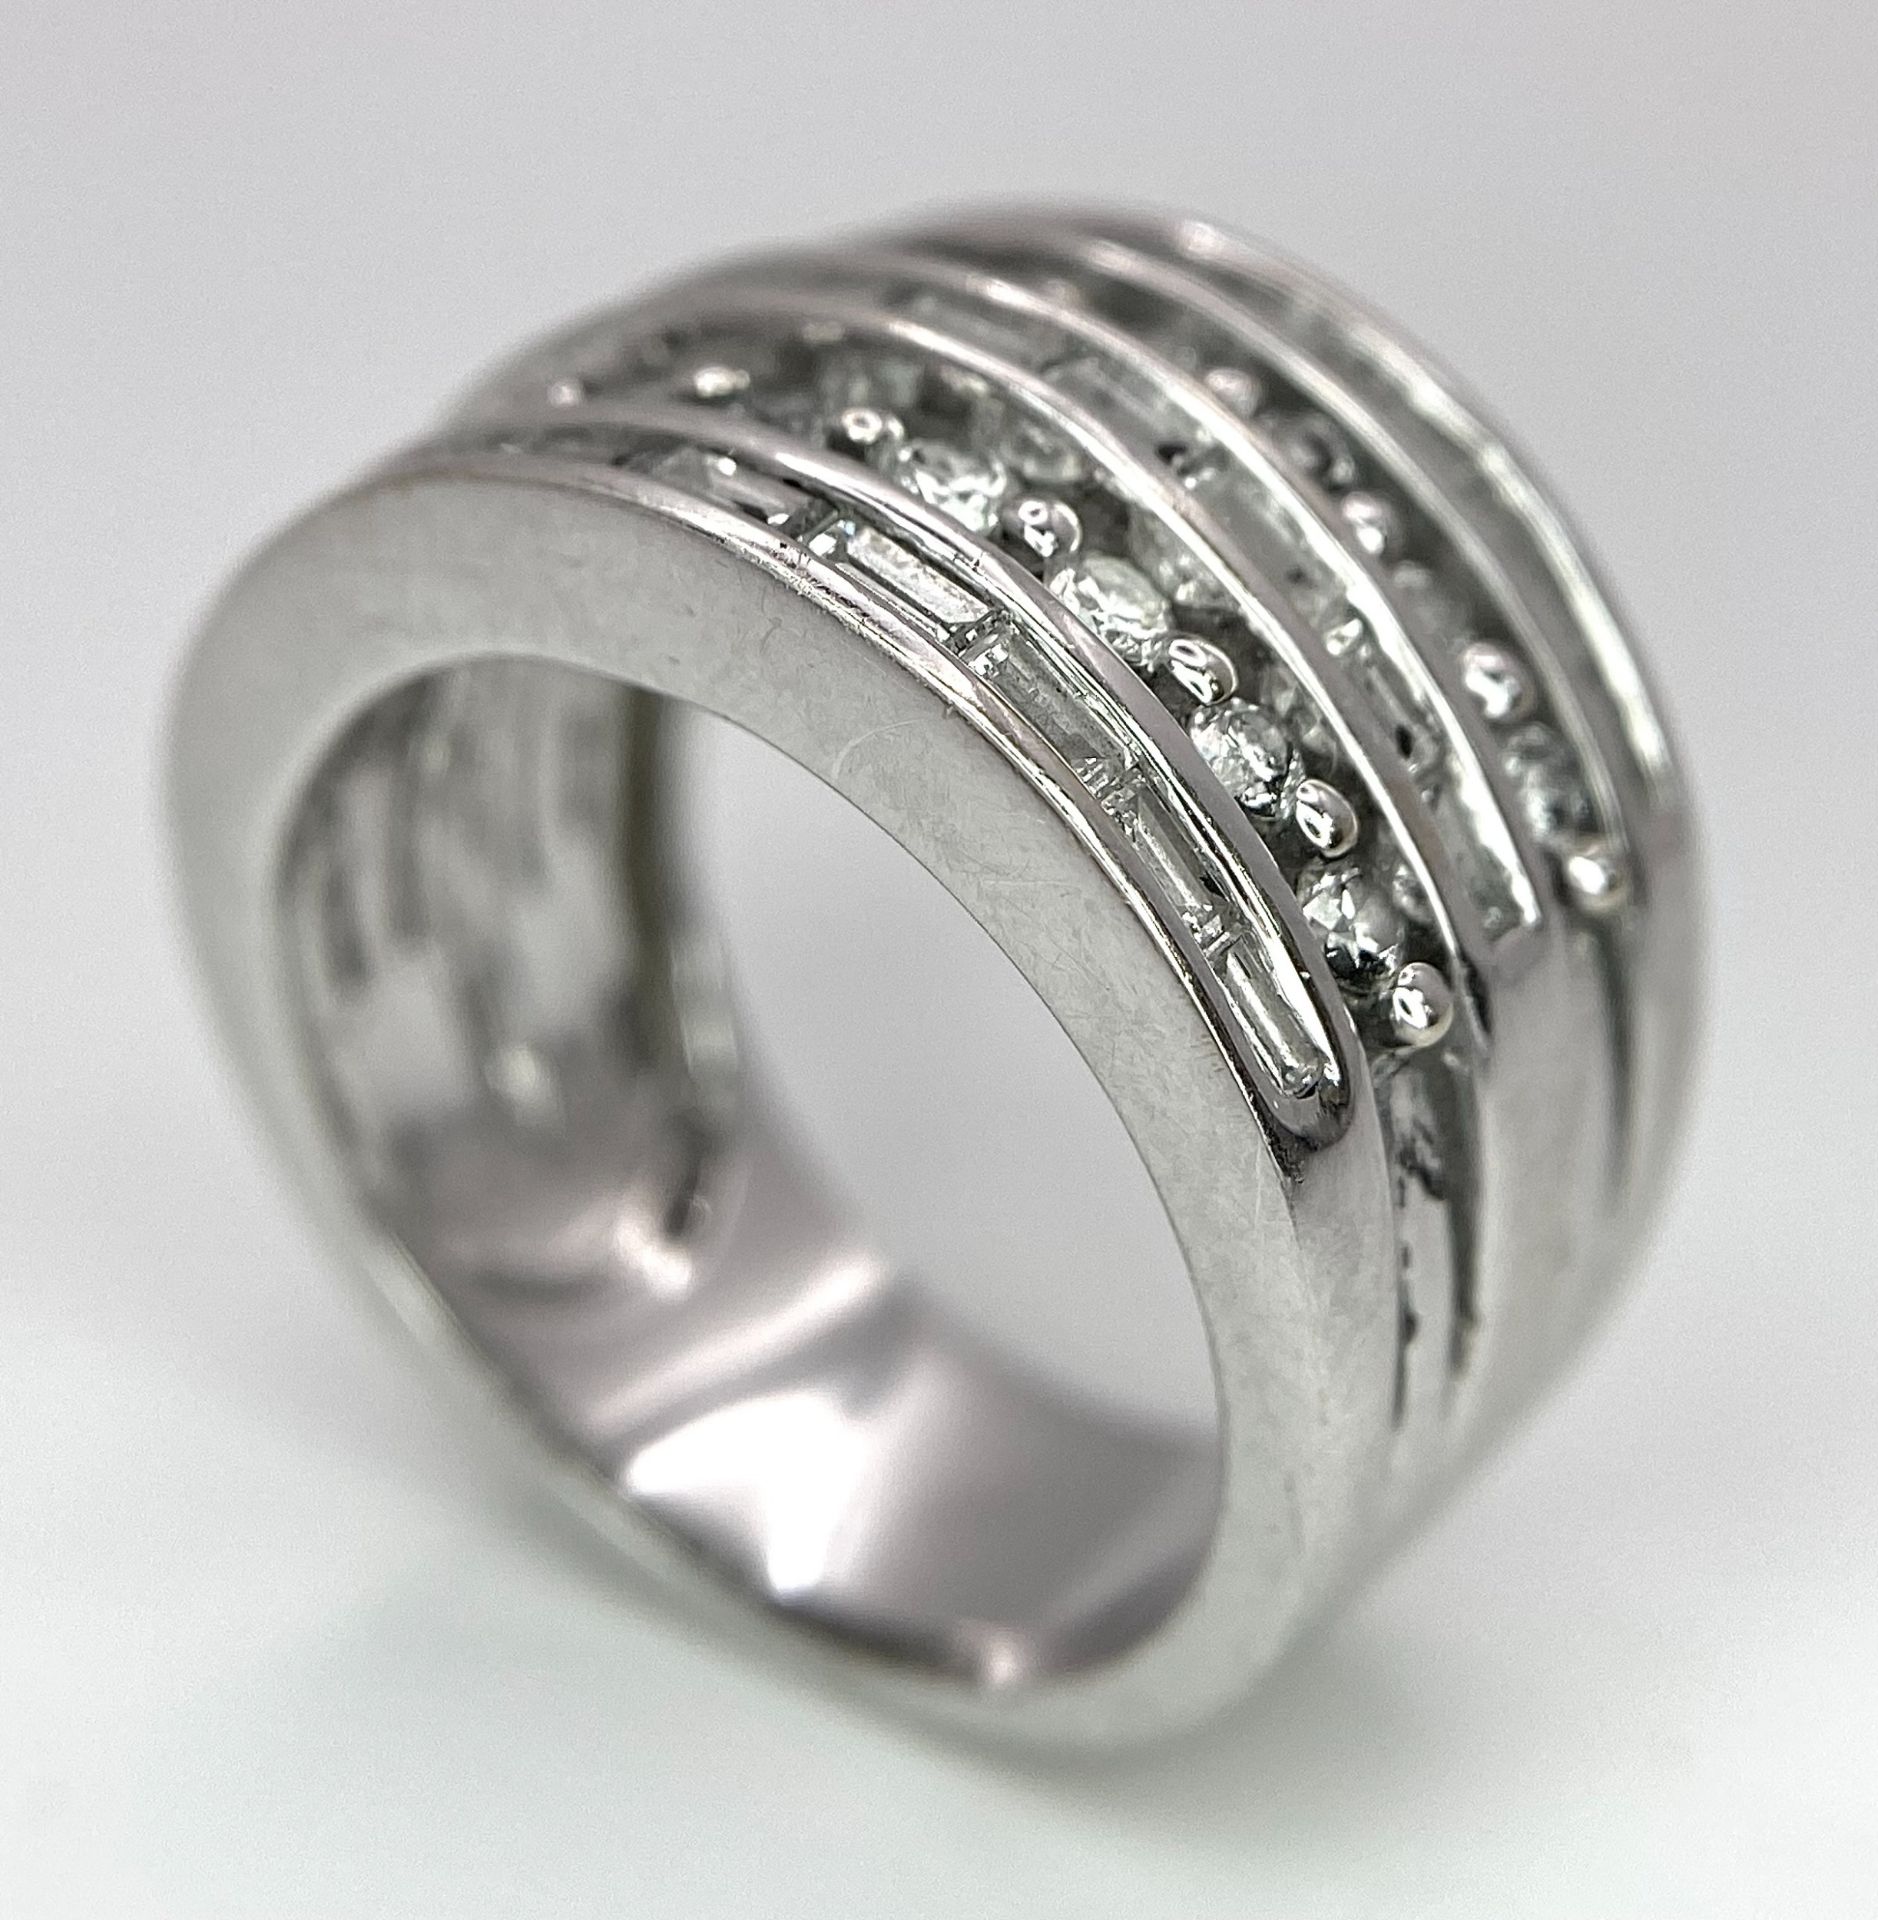 AN 18K WHITE GOLD 5 ROW DIAMOND RING. MIXTURE OF ROUND BRILLIANT CUTS AND BAGUETTE CUT DIAMONDS. - Image 6 of 9